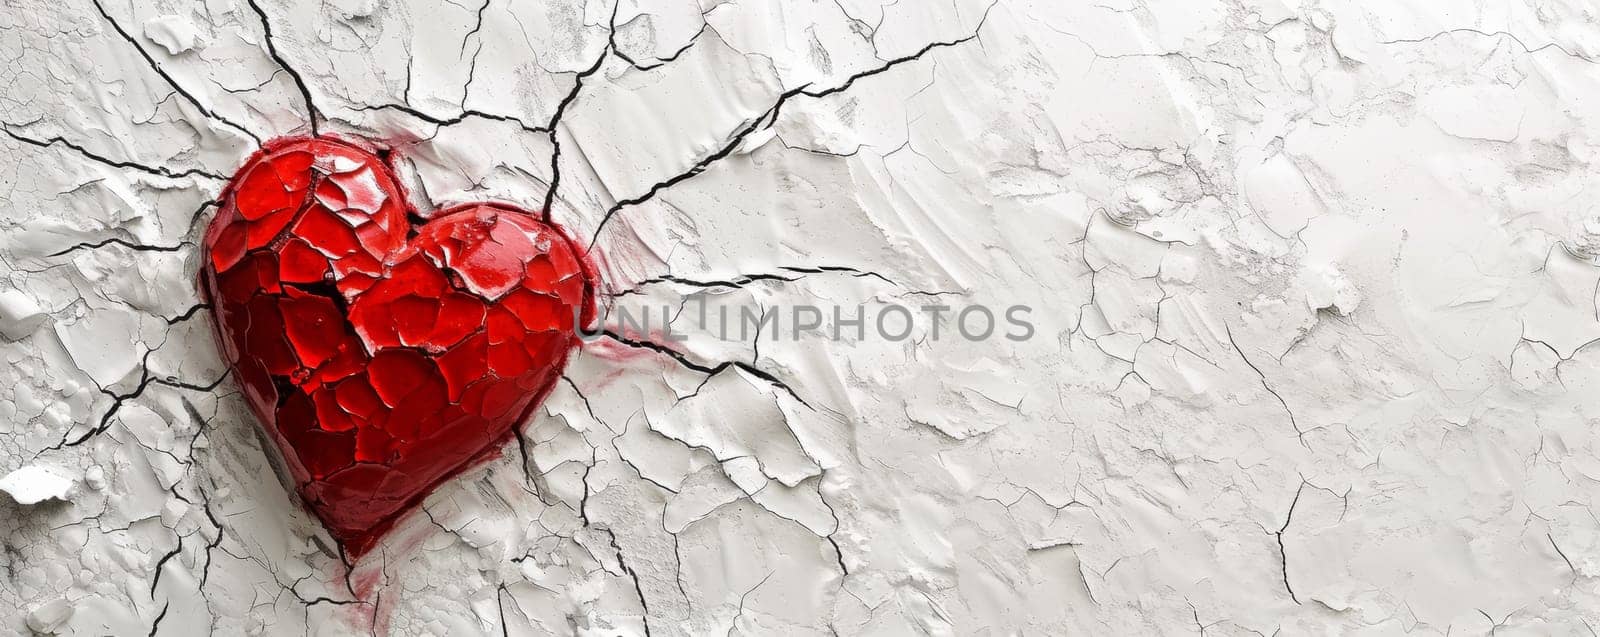 Red Heart in Cracked Wall.